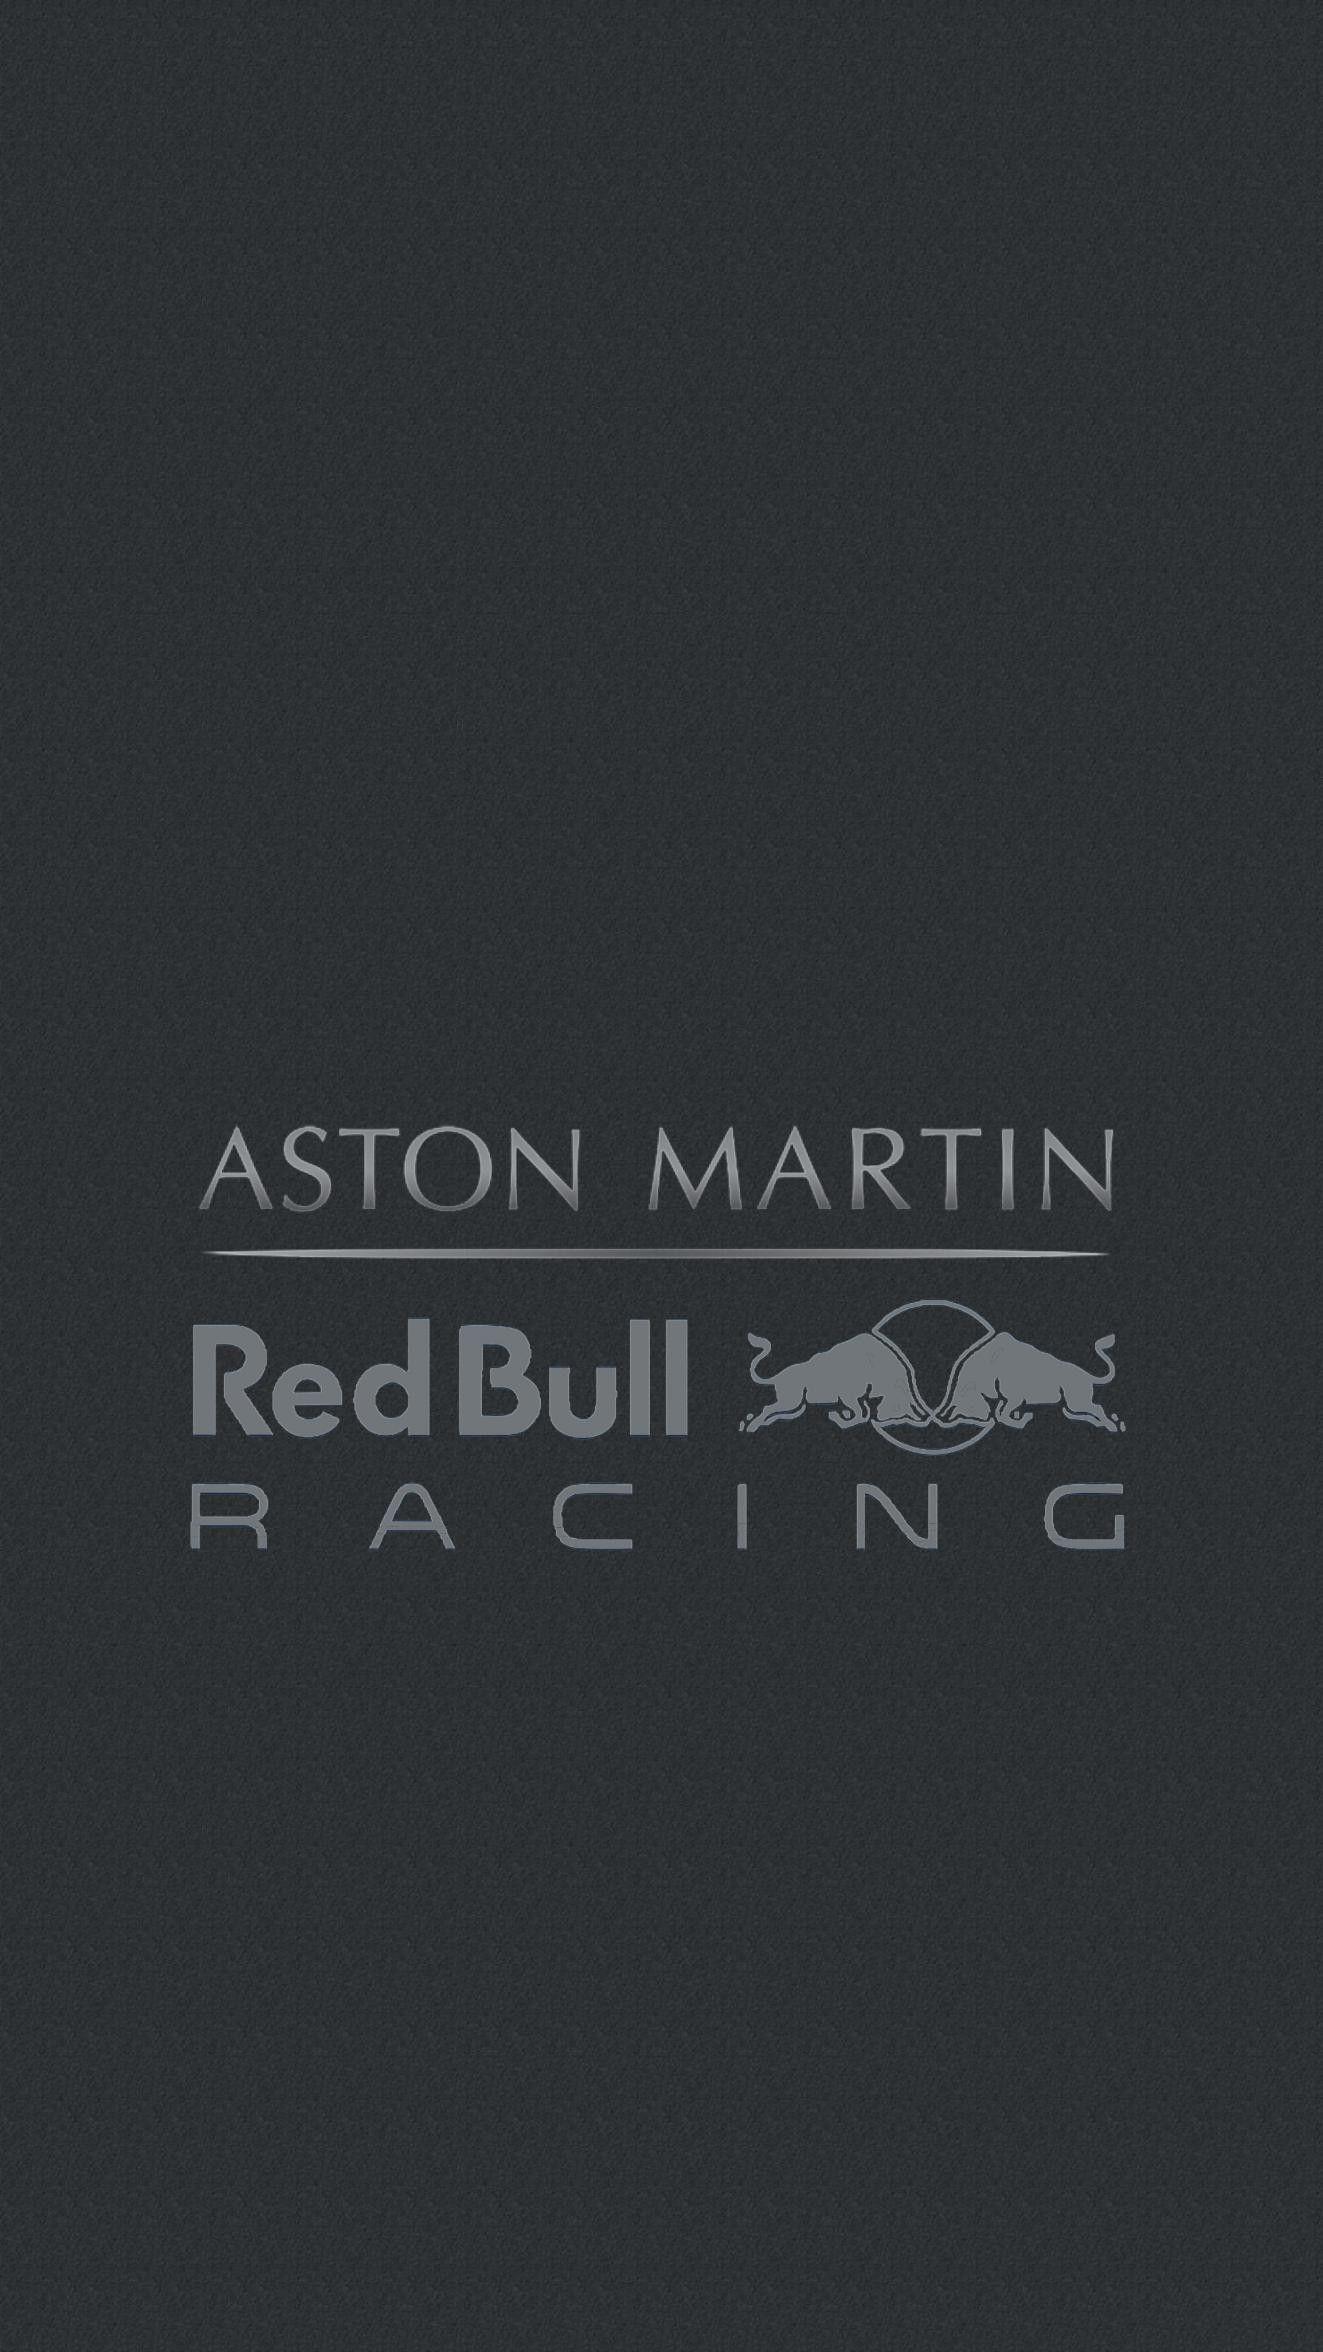 Aston Martin Red Bull Racing wallpaper gray background. Red